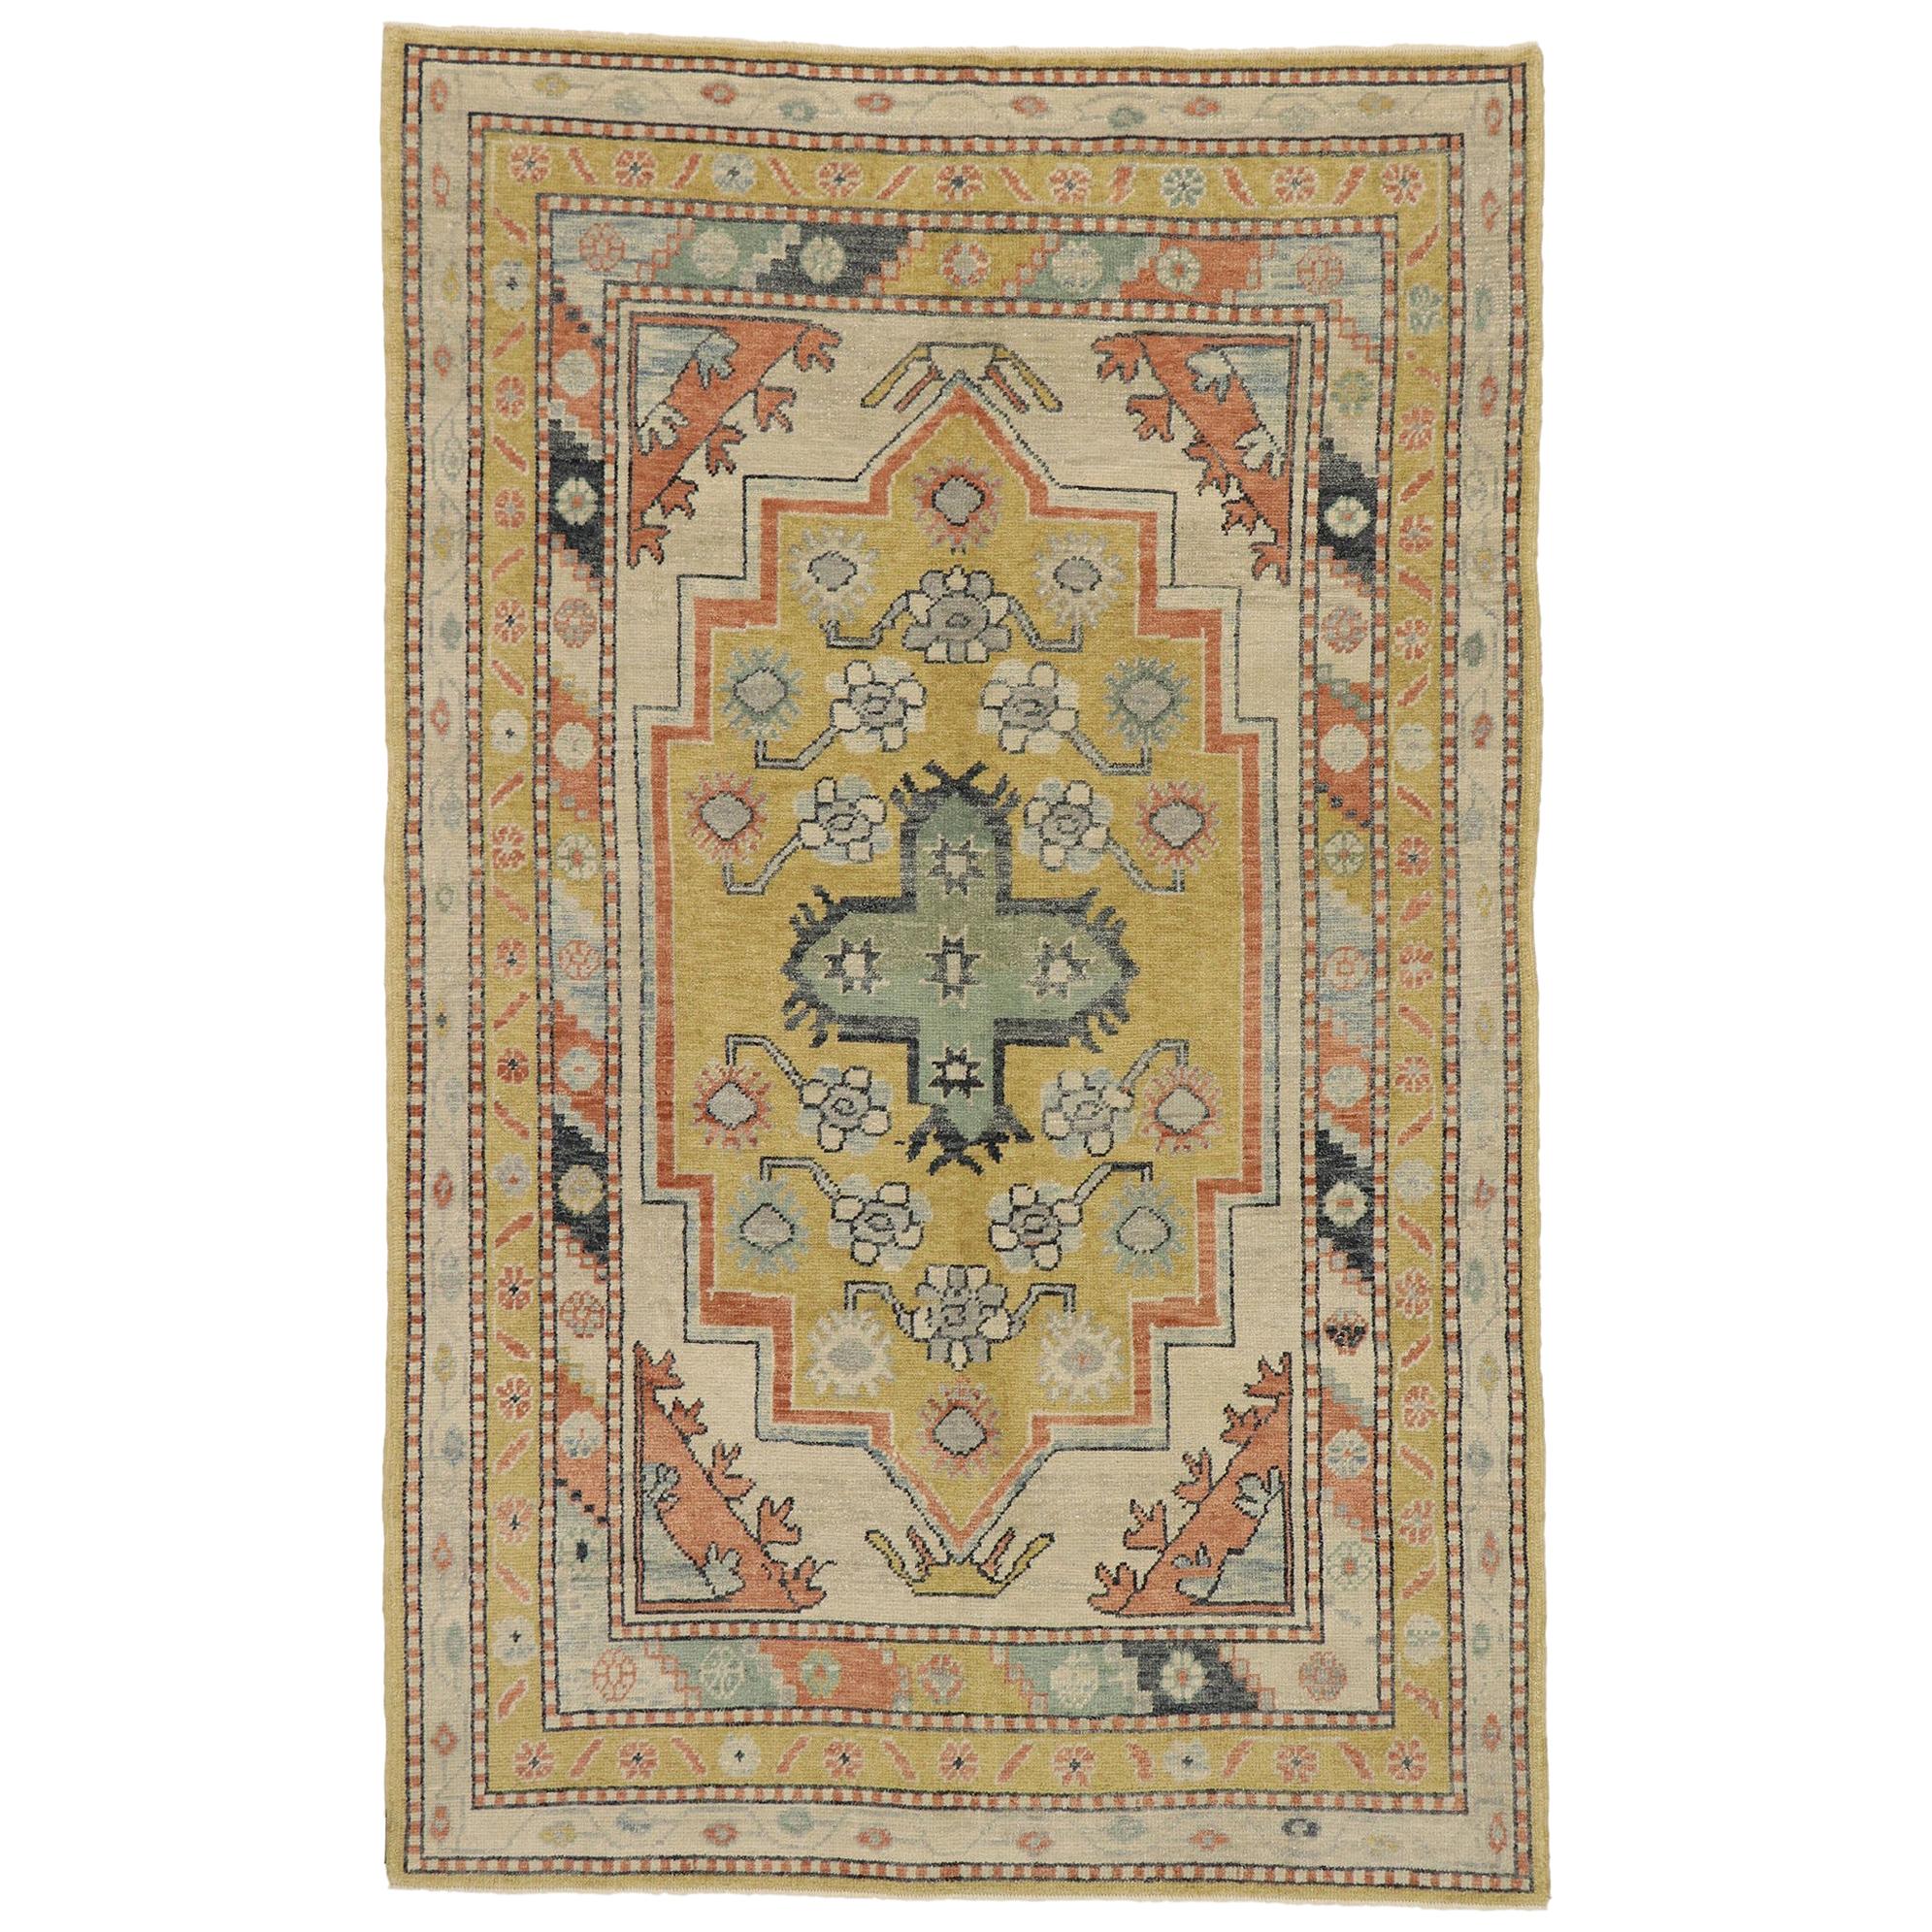 New Contemporary Turkish Oushak Rug with Postmodern Arts & Crafts Style